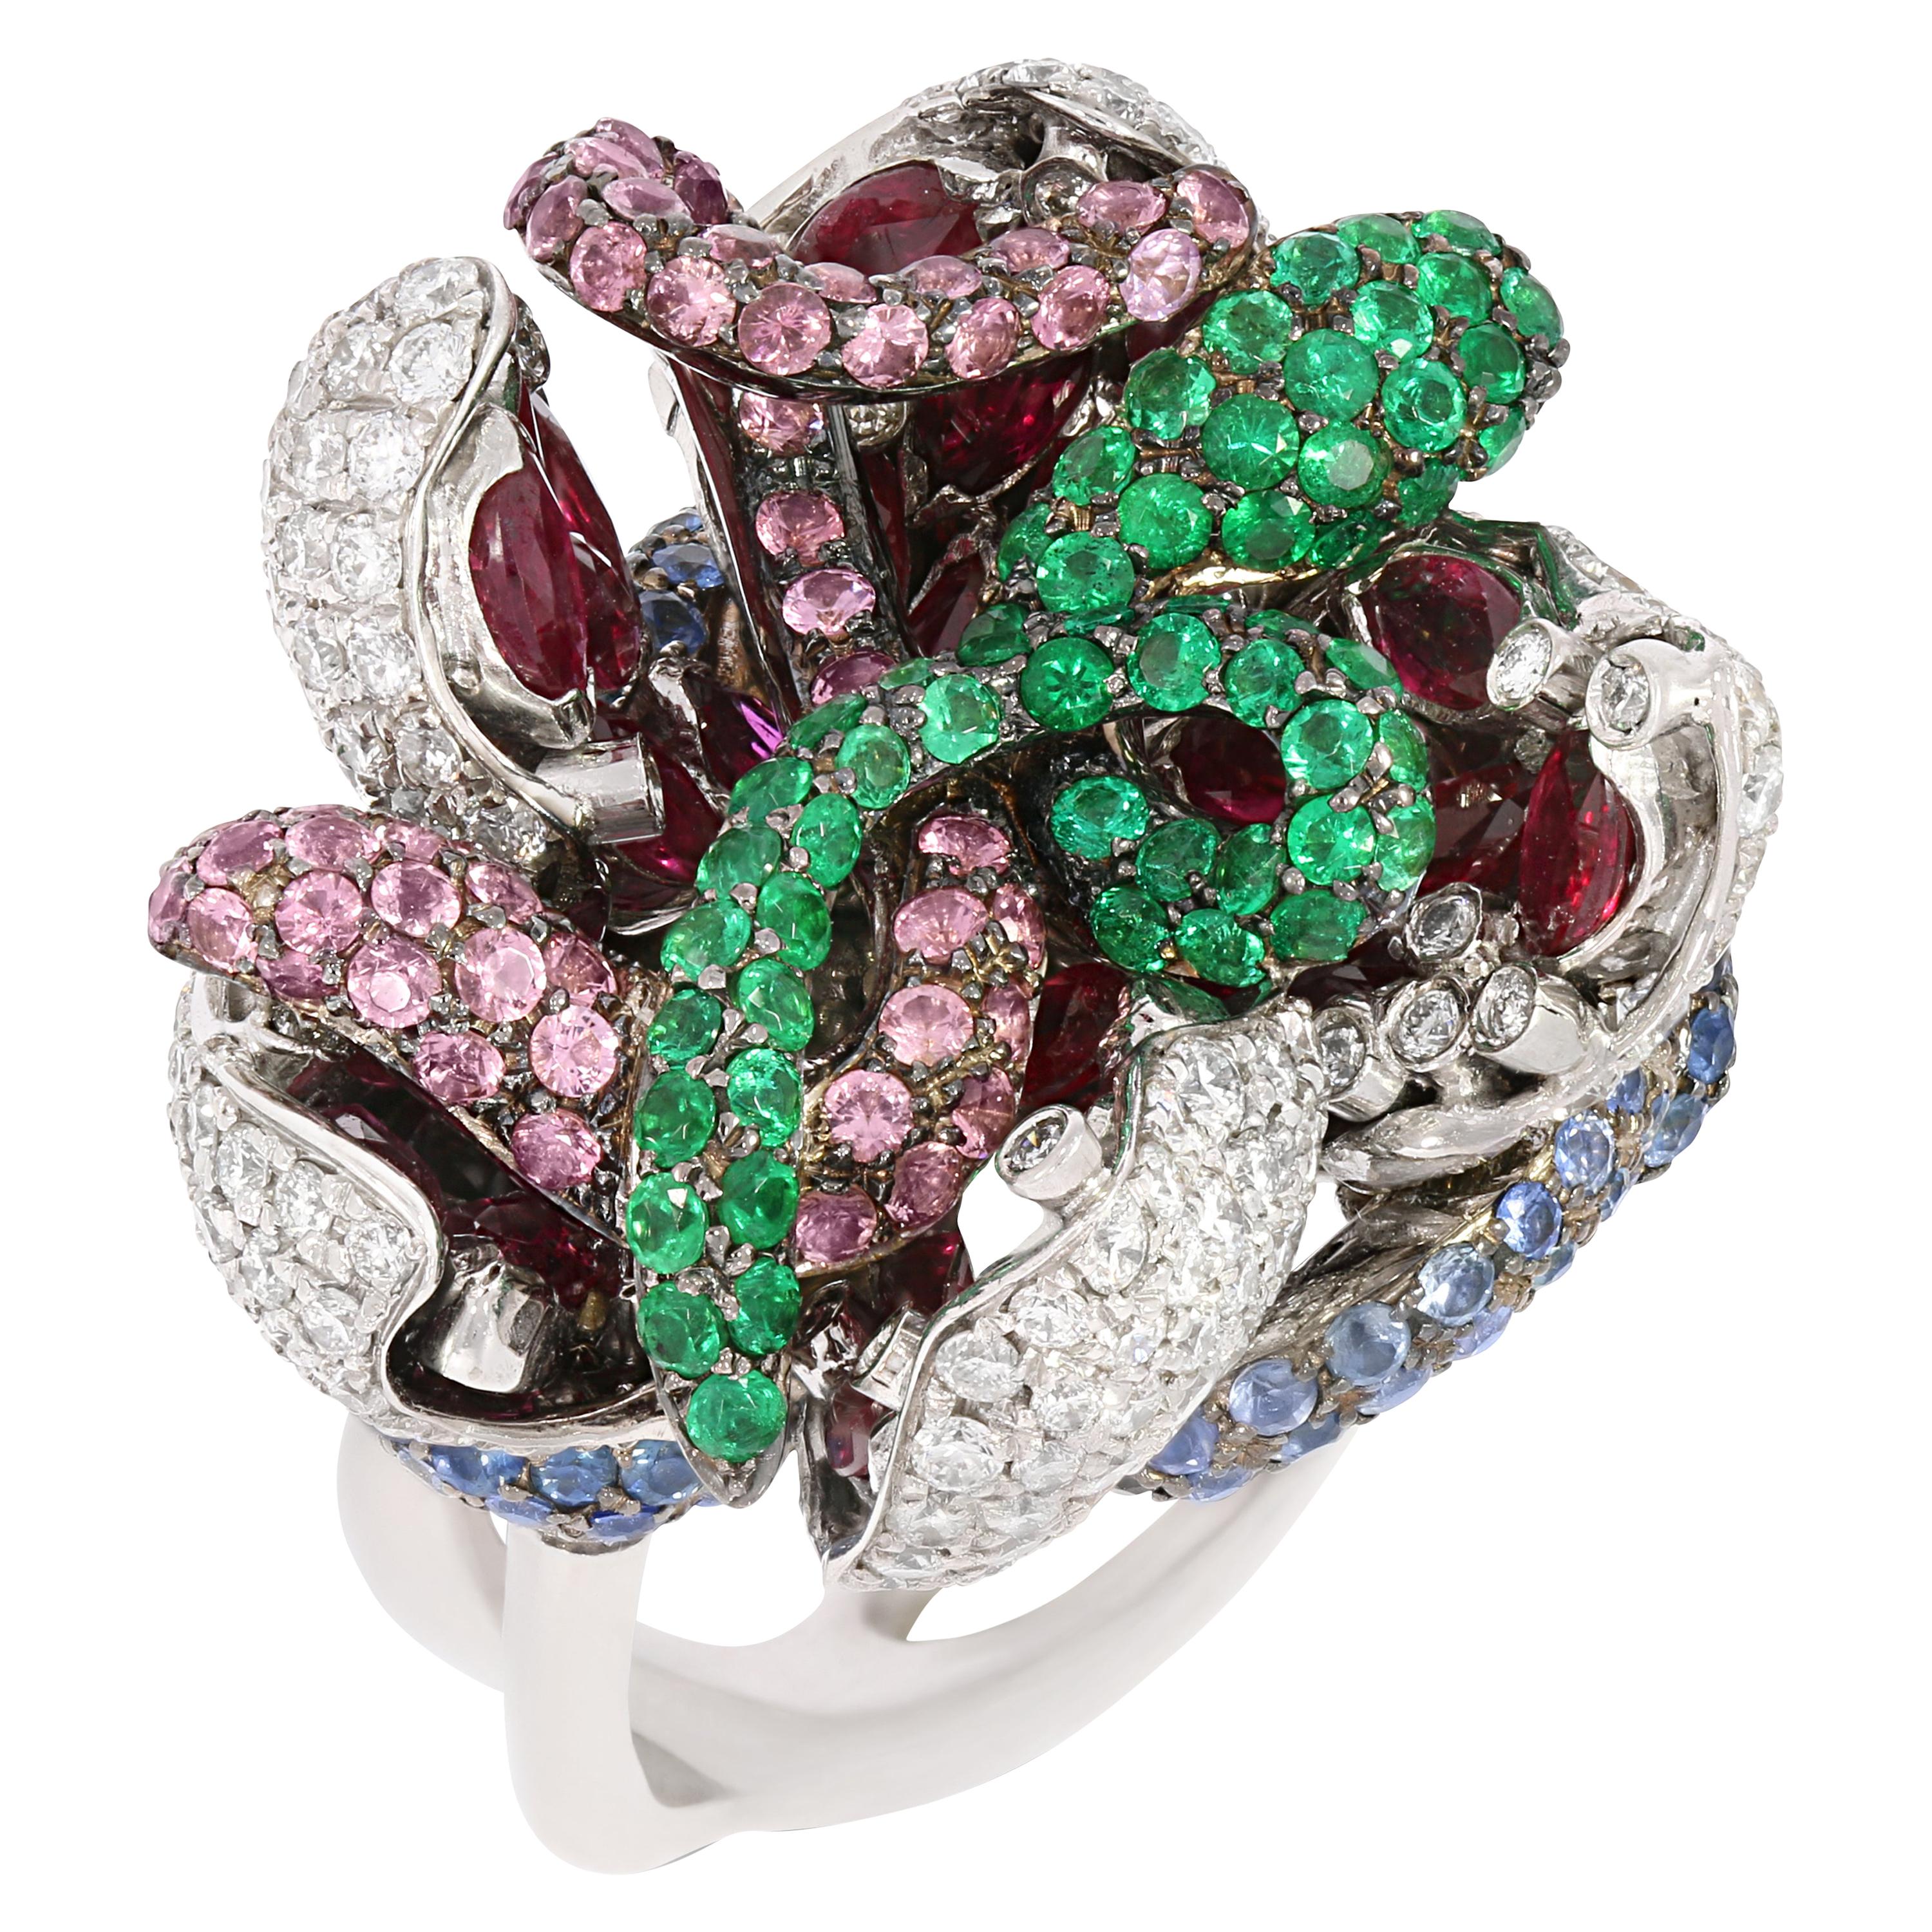 Rosior one-off Diamond, Sapphire, Tourmaline and Emerald Ring set in White Gold